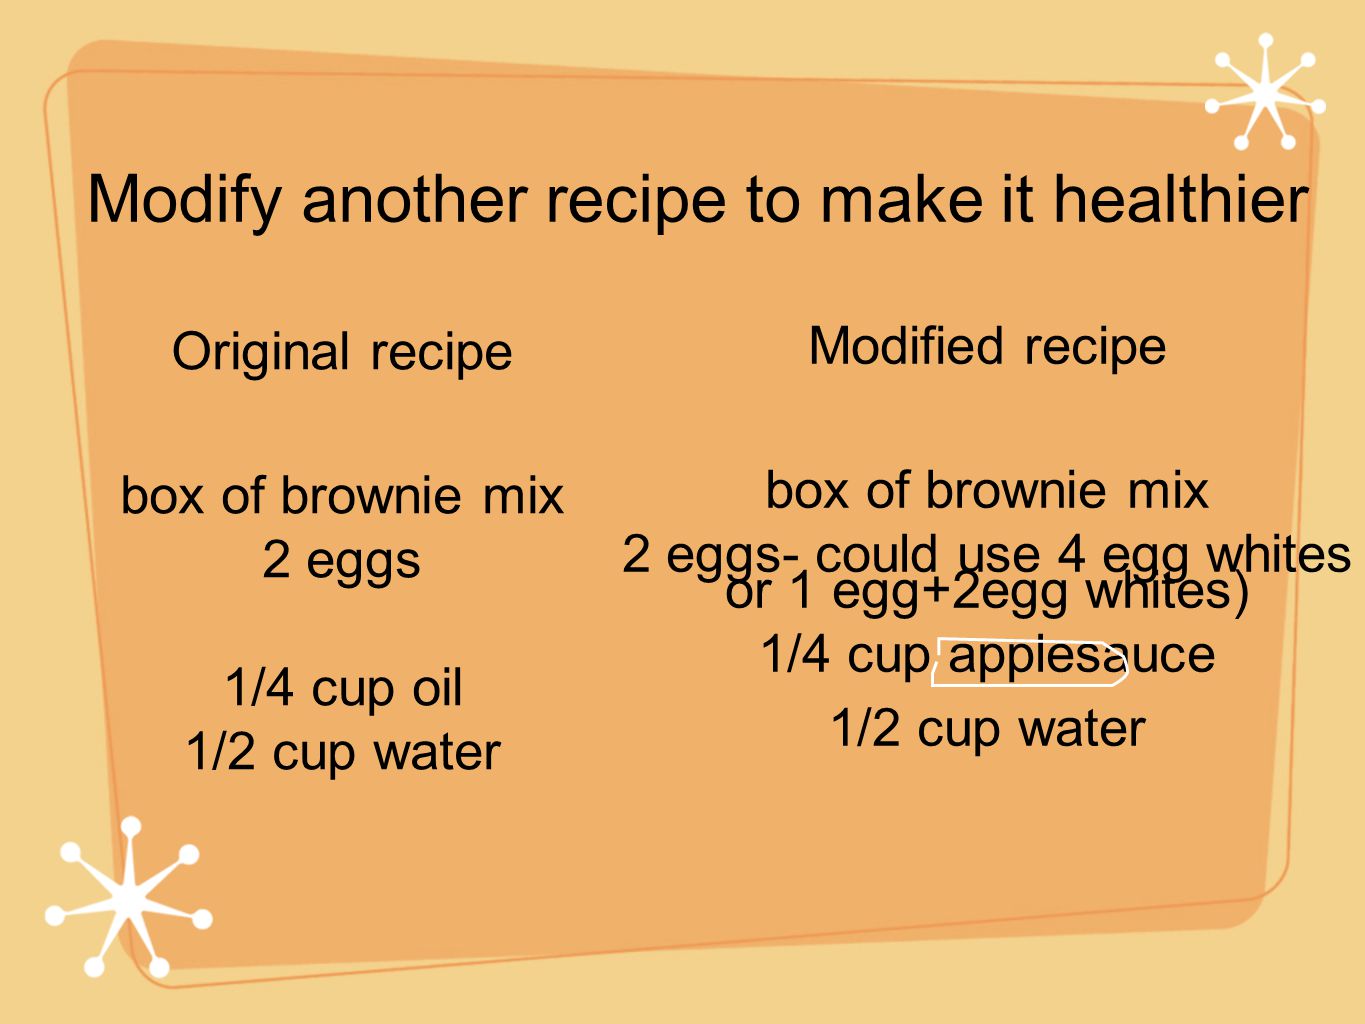 Modify another recipe to make it healthier Original recipe box of brownie mix 2 eggs 1/4 cup oil 1/2 cup water Modified recipe box of brownie mix 2 eggs- could use 4 egg whites or 1 egg+2egg whites) 1/4 cup applesauce 1/2 cup water